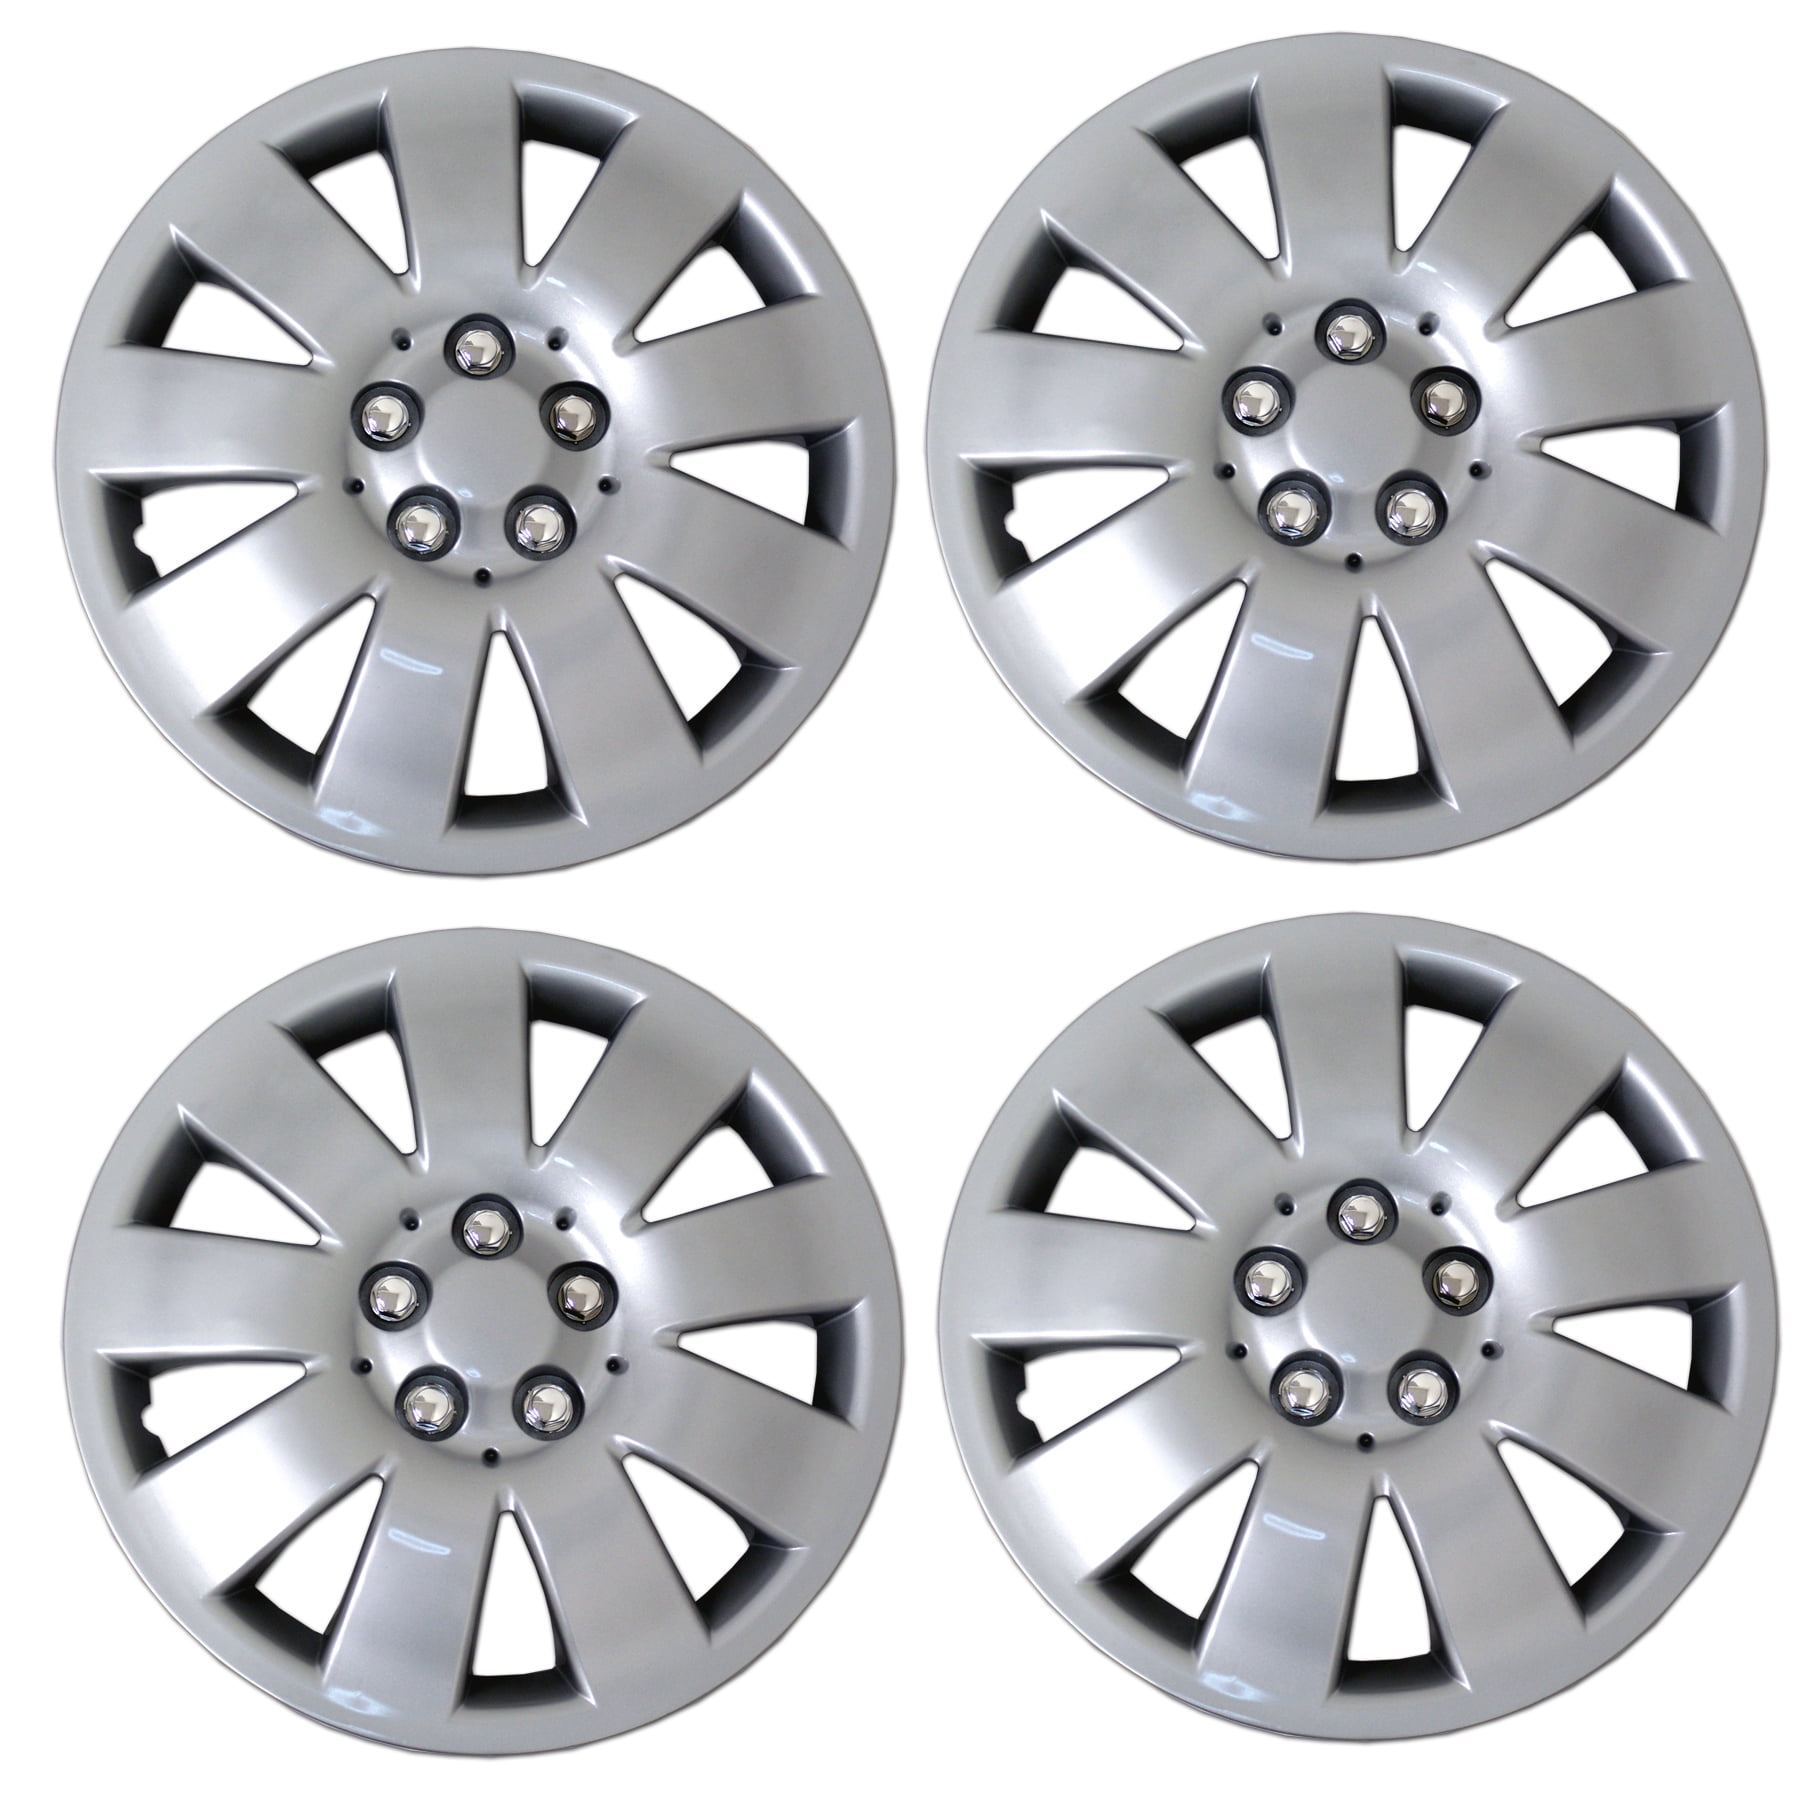 Pop-On TuningPros WSC3-721S16 4pcs Set Snap-On Type 16-Inches Metallic Silver Hubcaps Wheel Cover 